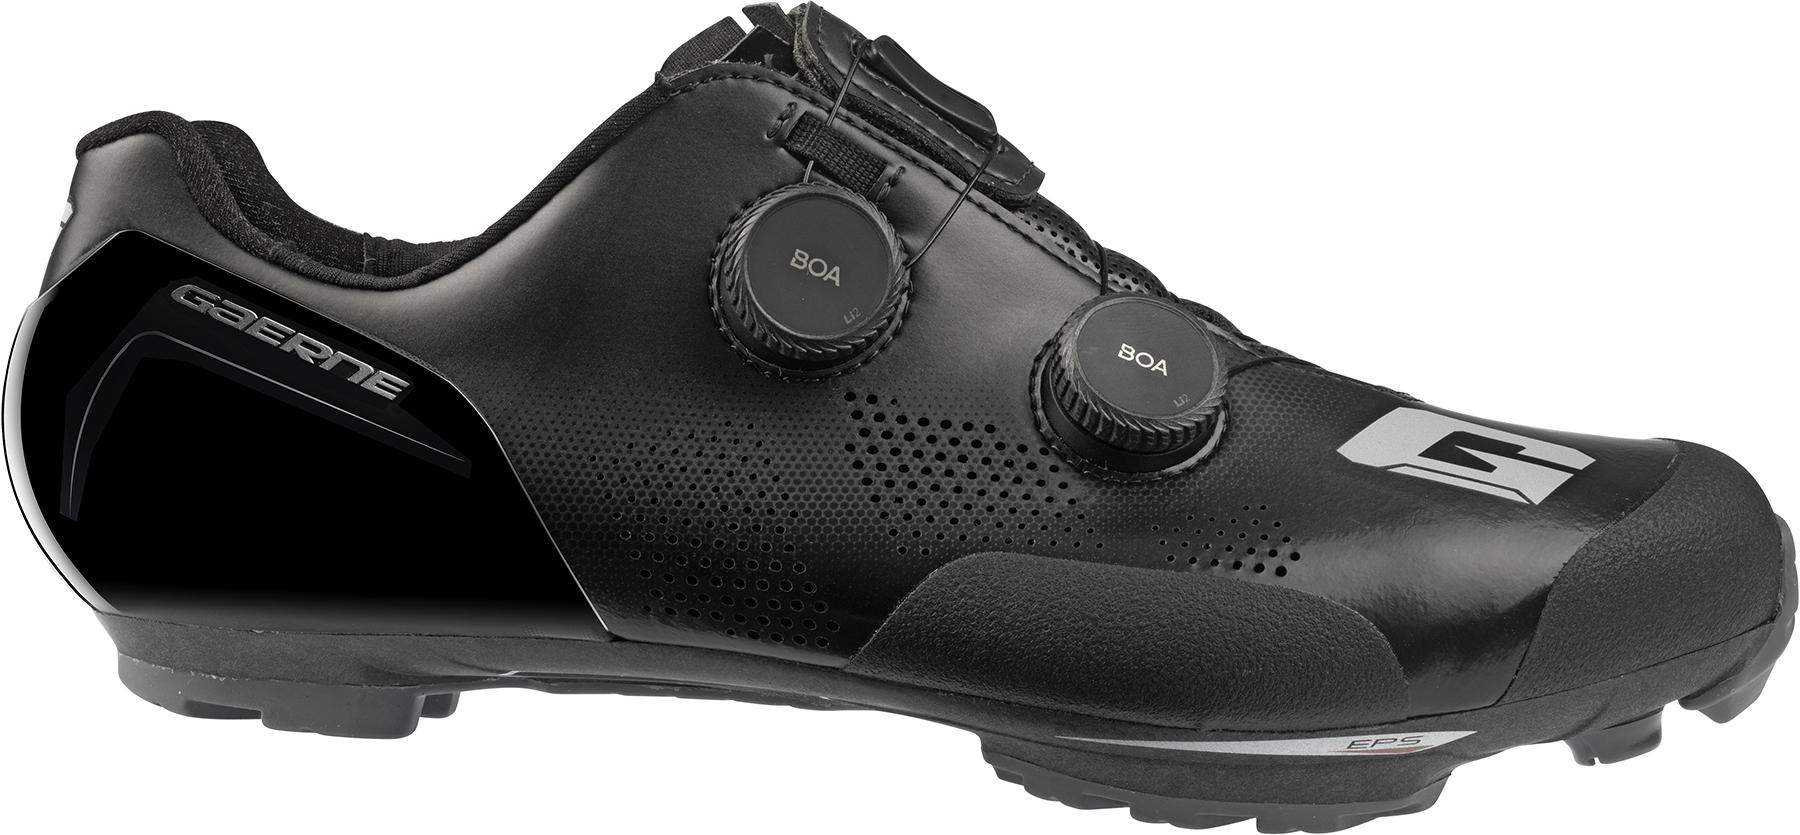 Gaerne Carbon G. SNX Shoes | cycling shoes